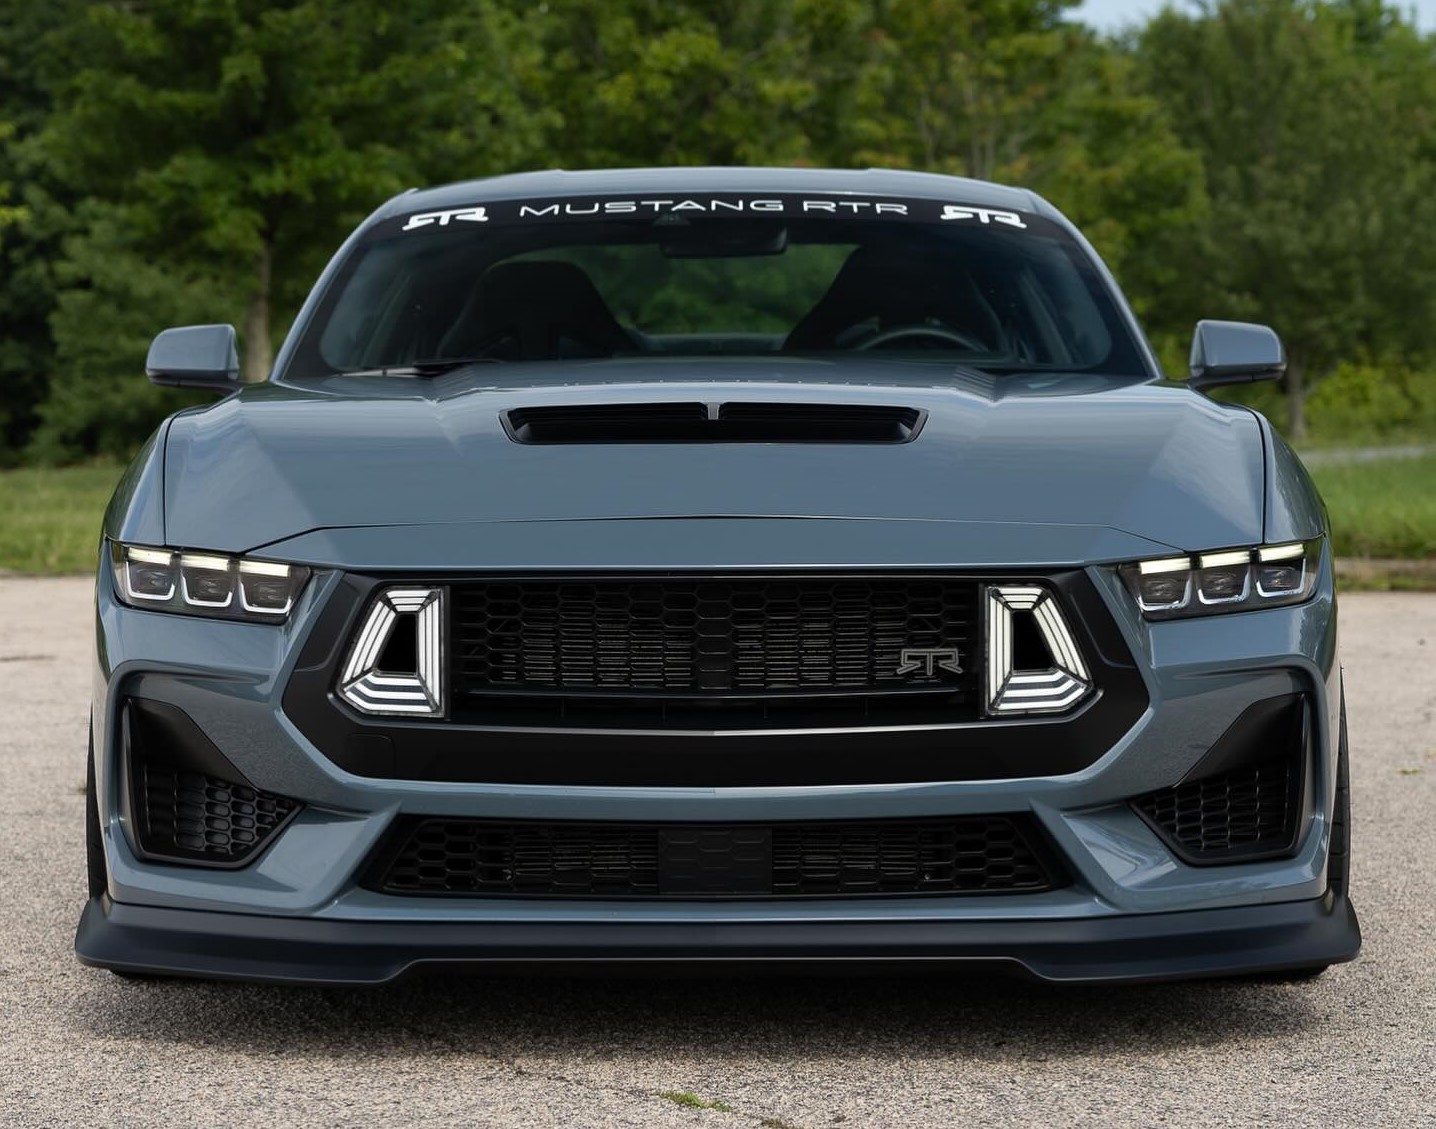 S650 Mustang RTR Spec 1 (International Mustang RTR vehicle package) RTR Spec 1 3